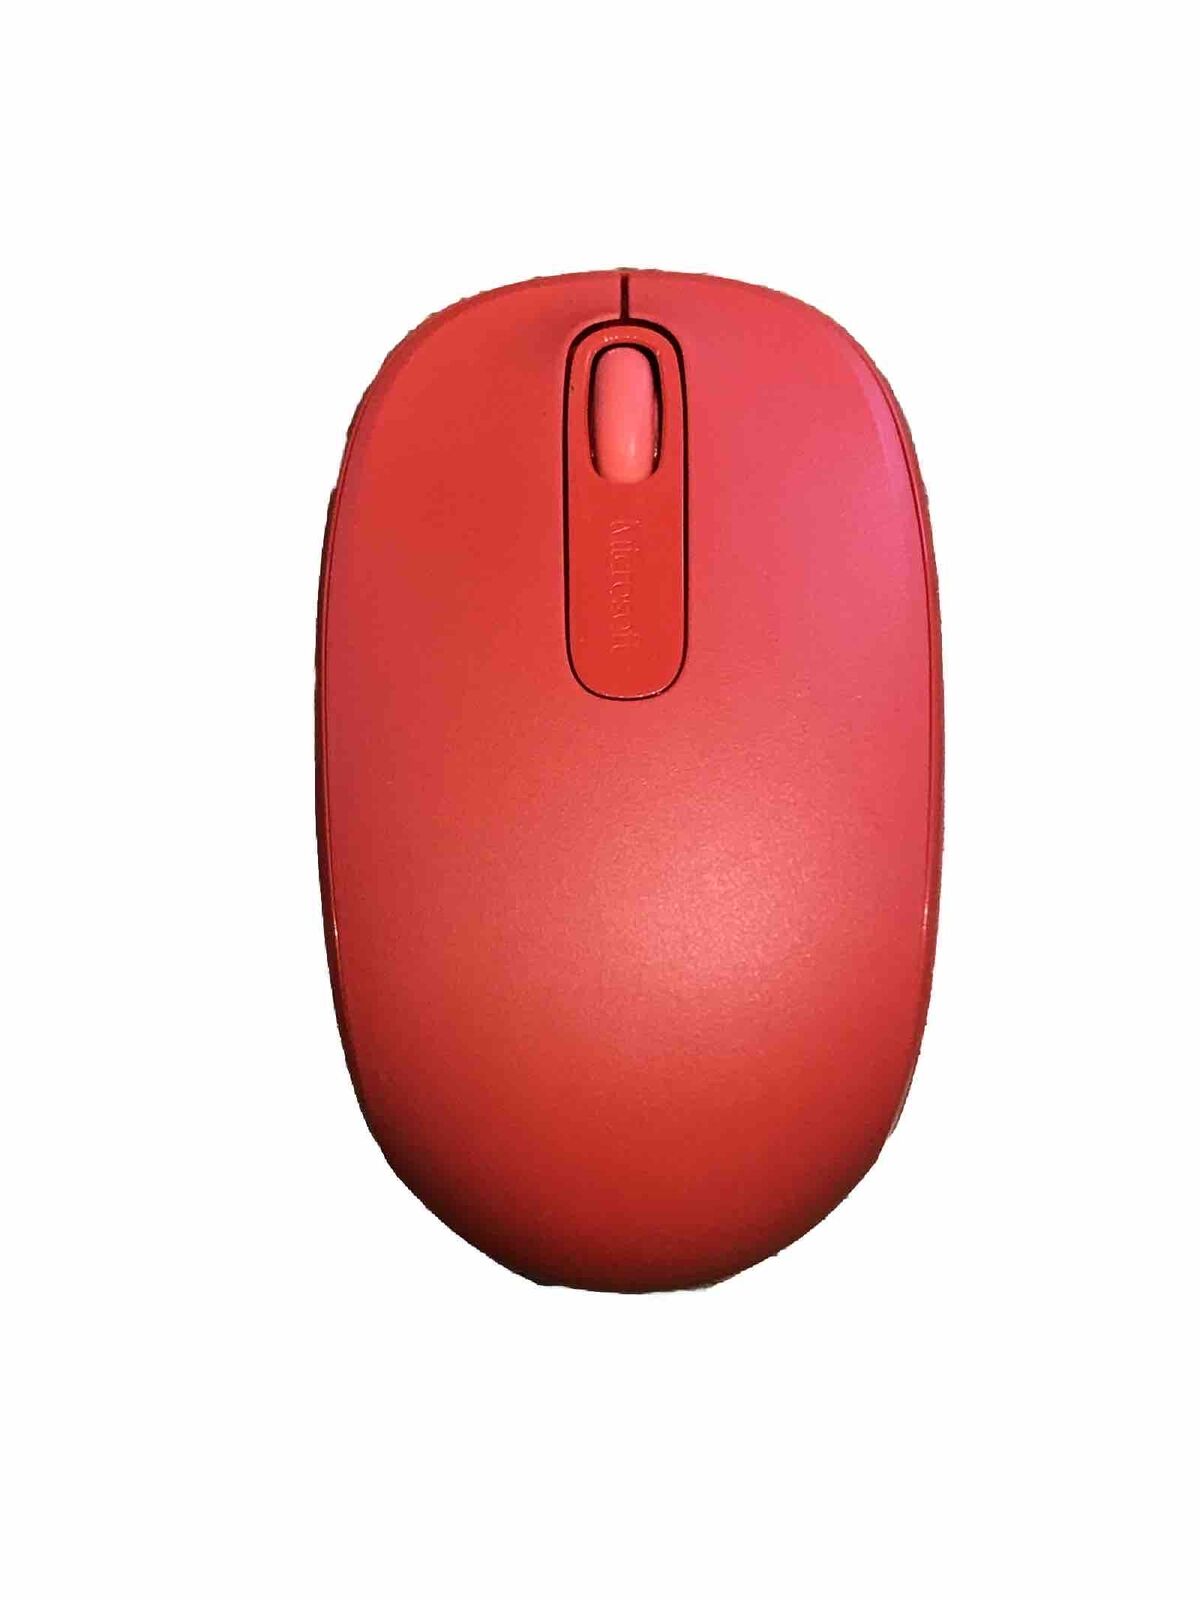 Microsoft Wireless Mobile Mouse 1593 Flame Red Vintage Rare USB